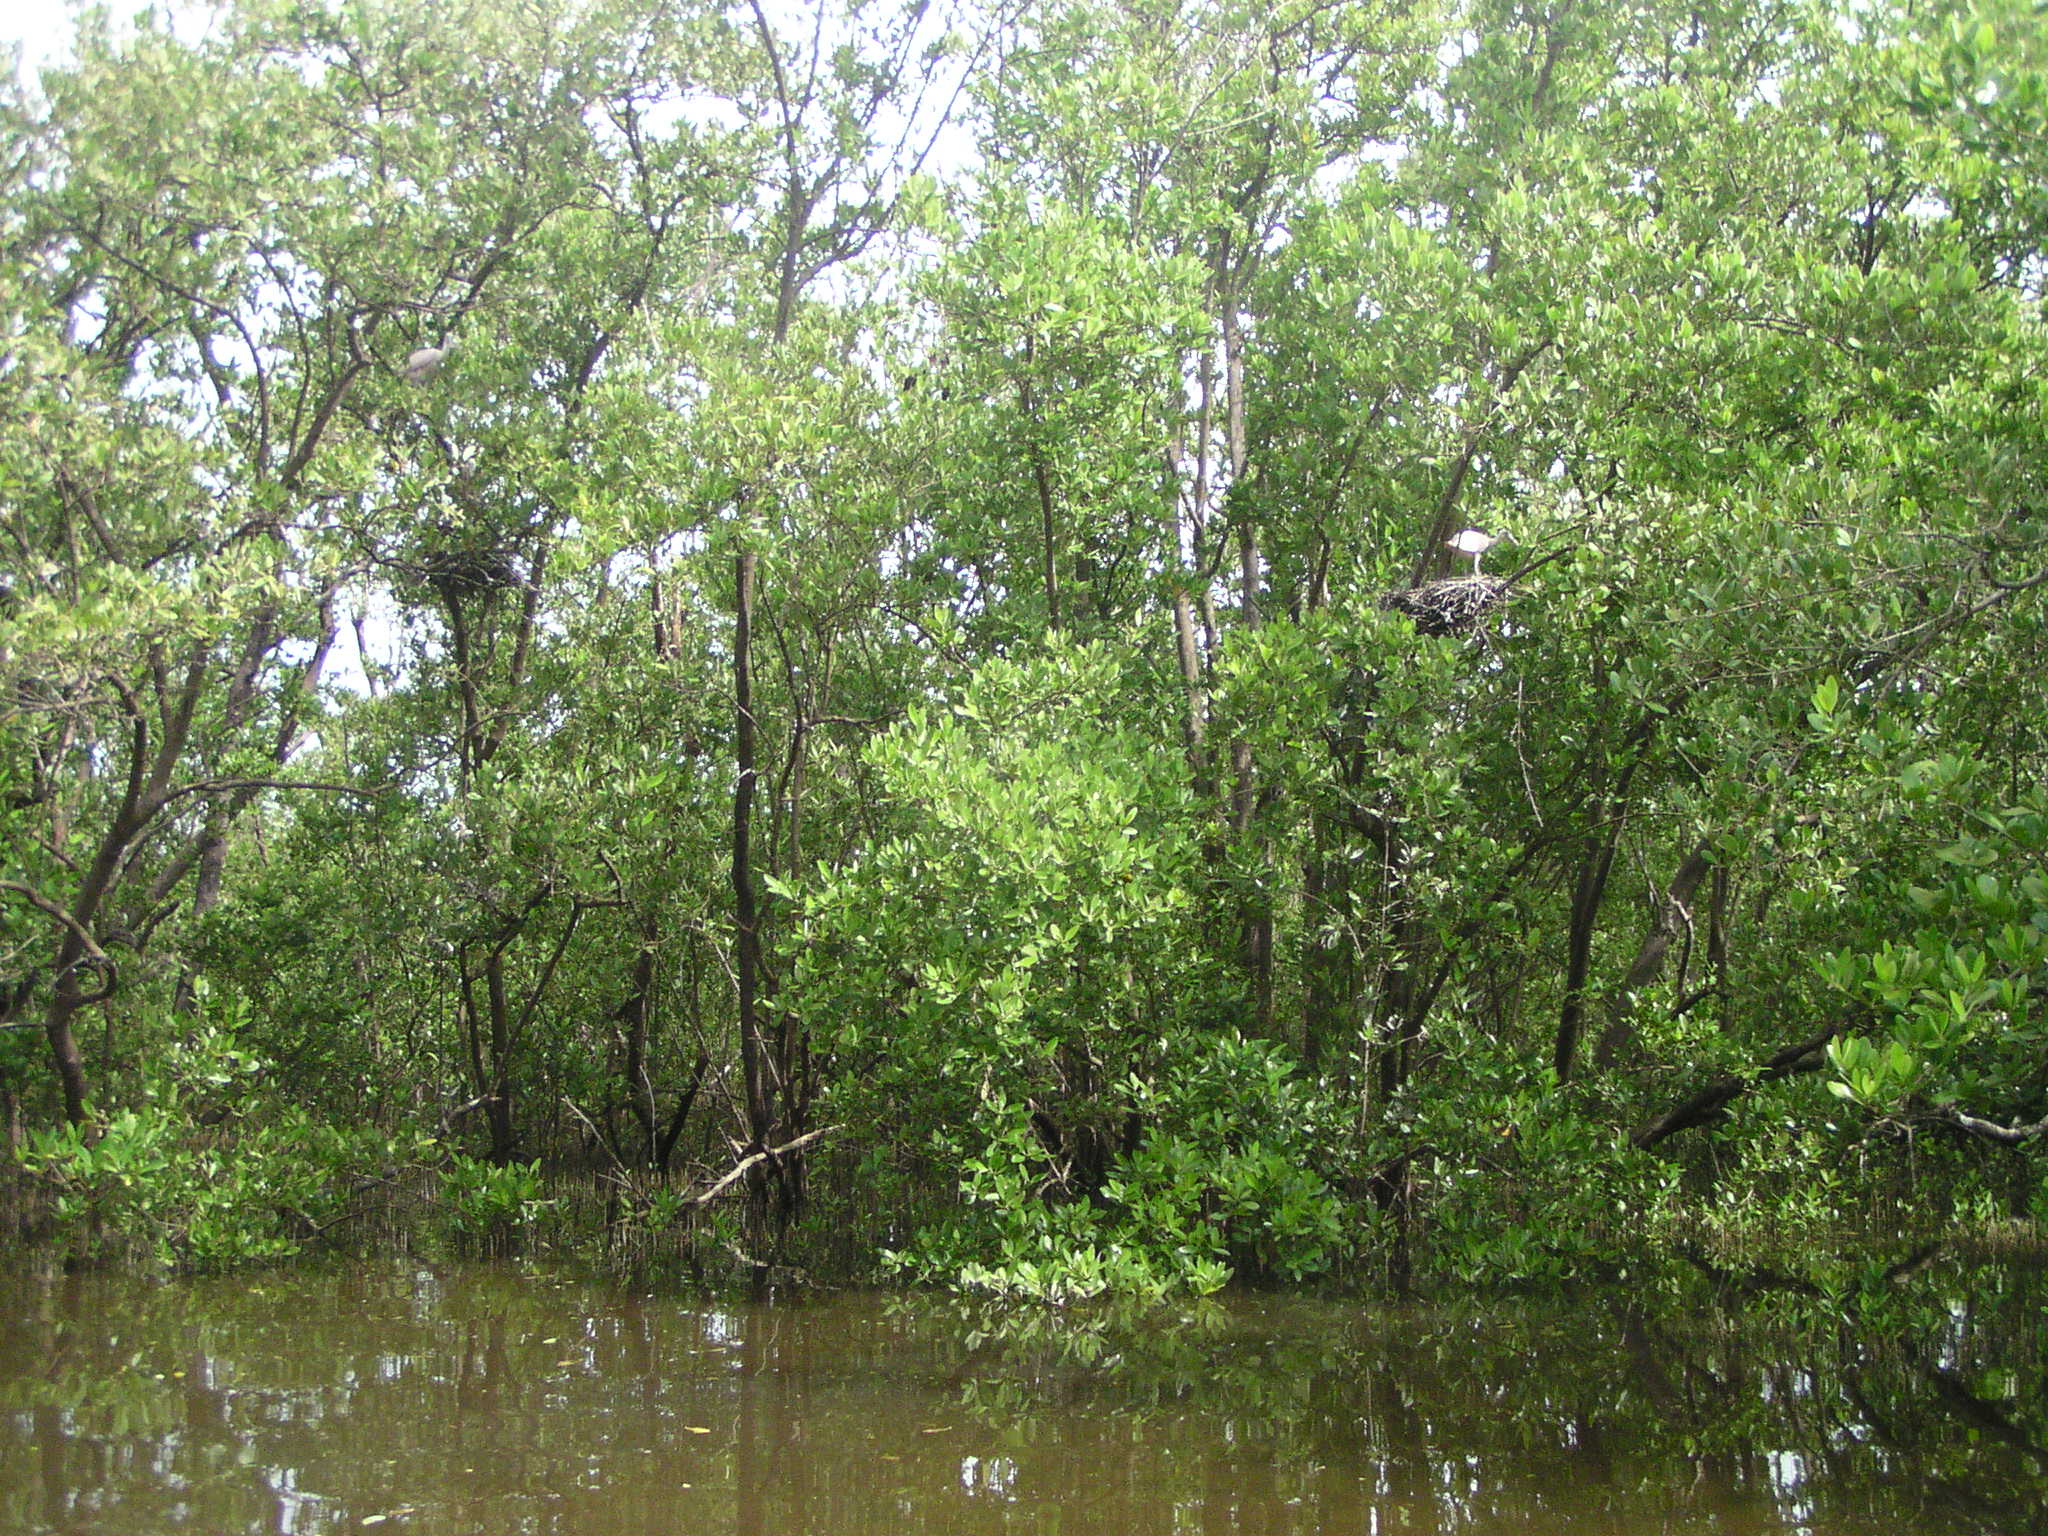 Mangroves are highly productive ecosystems present in 123 countries.